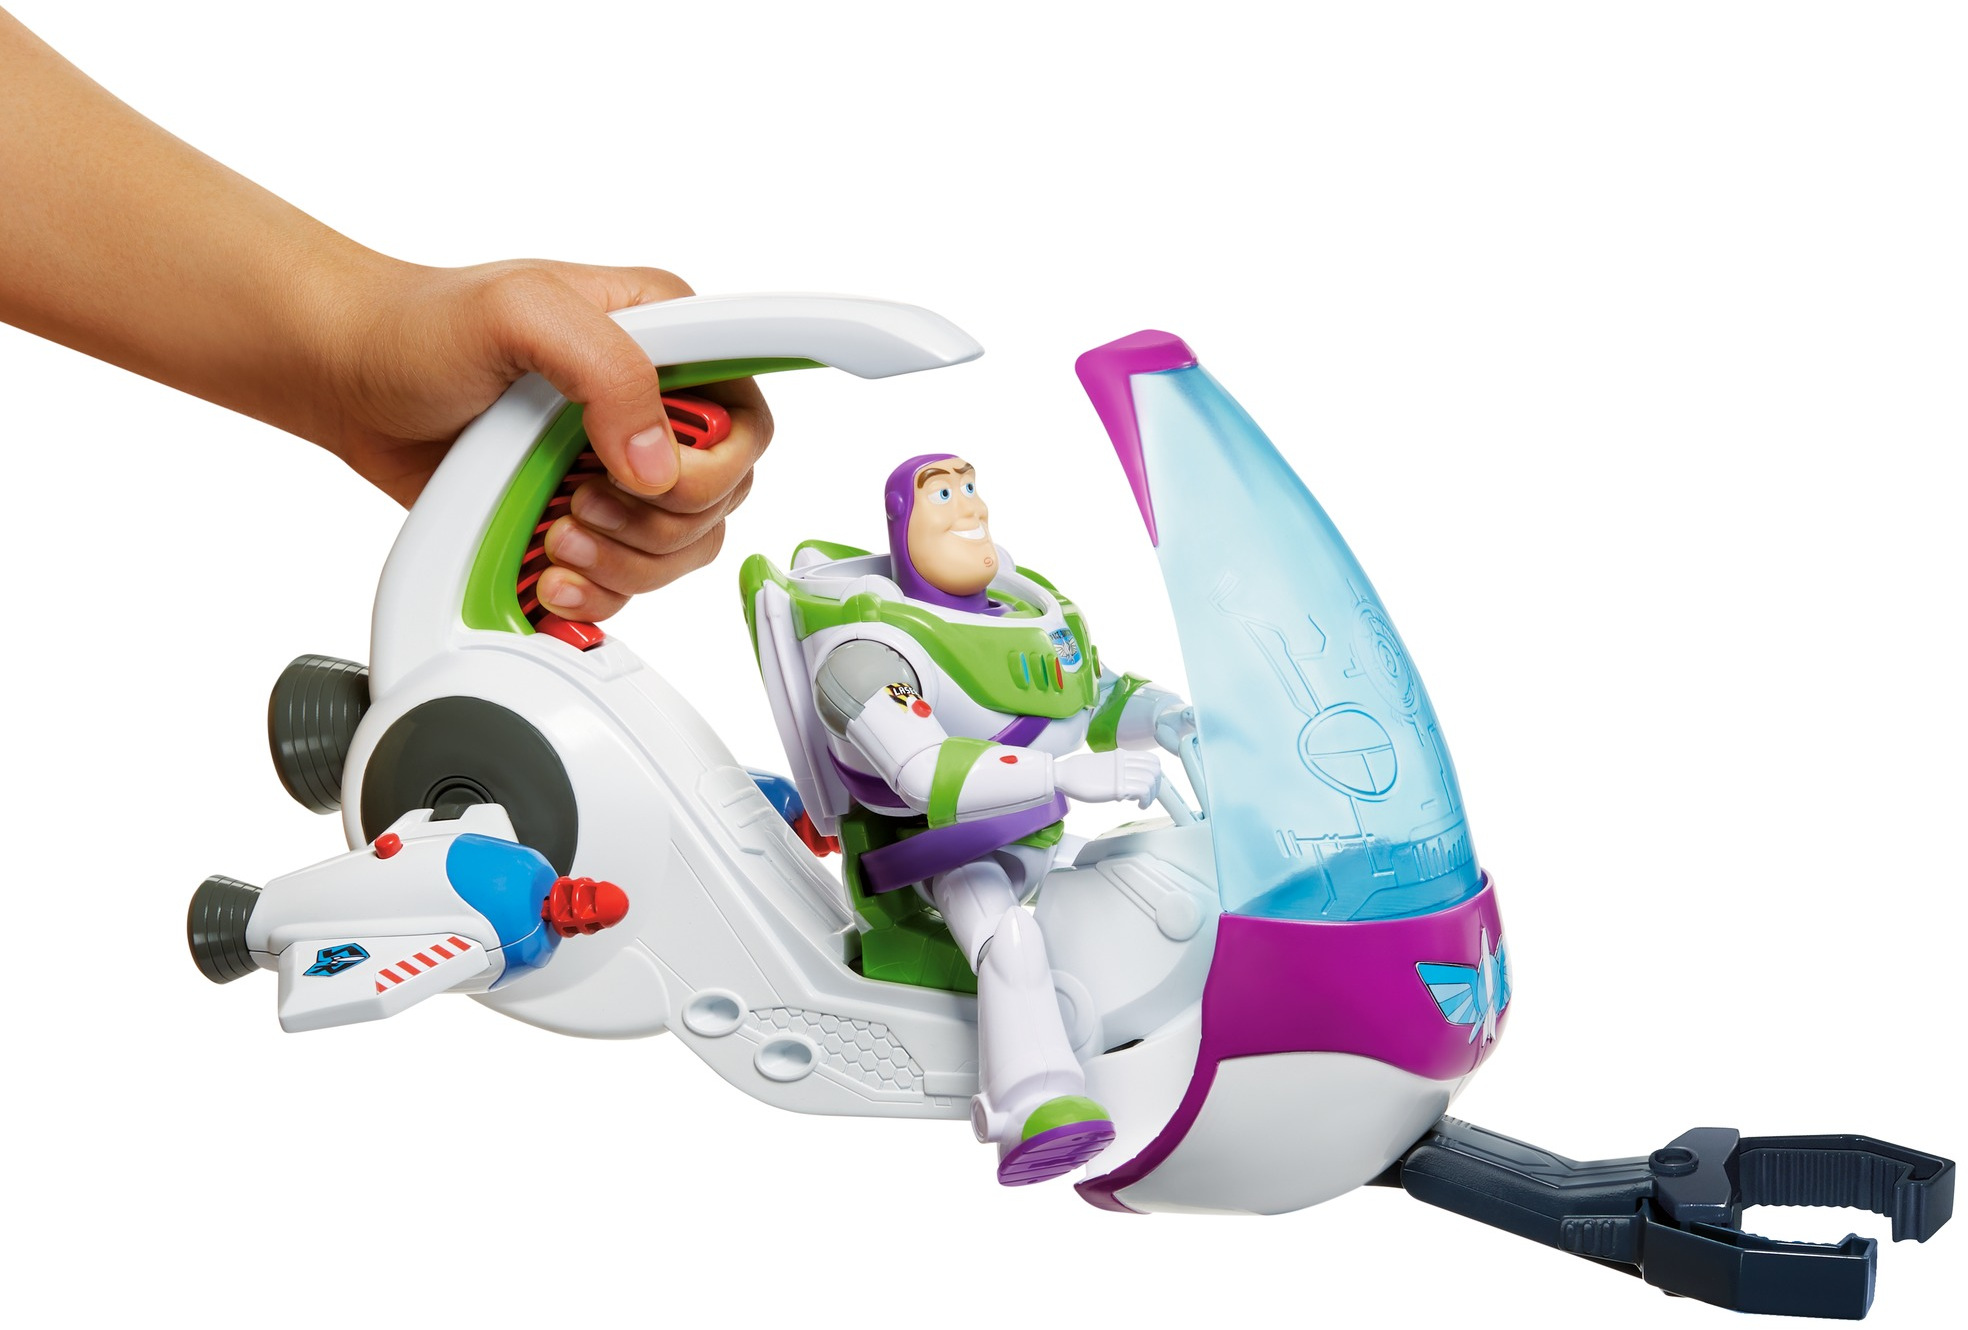 Disney Pixar Toy Story Galaxy Explorer Spacecraft Toy Vehicle For 4 Year Olds & Up - image 2 of 6